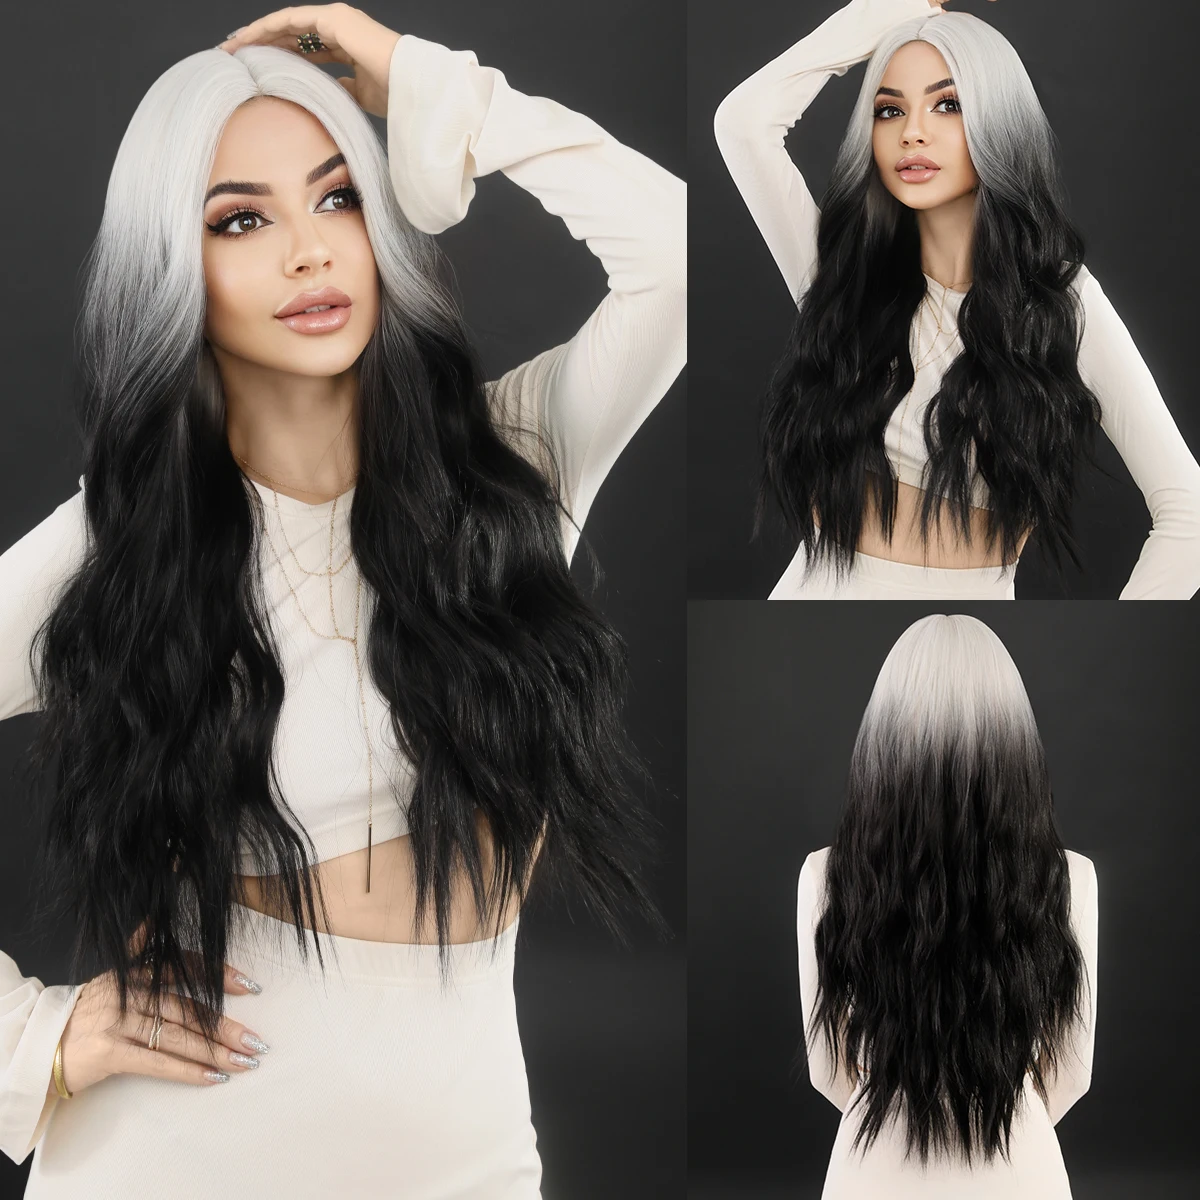 NAMM Ombre Black White Wavy Hair Wig for Women Cosplay Daily Party Synthetic Natural Middle Part Curly Wig Lolita Heat Resistant